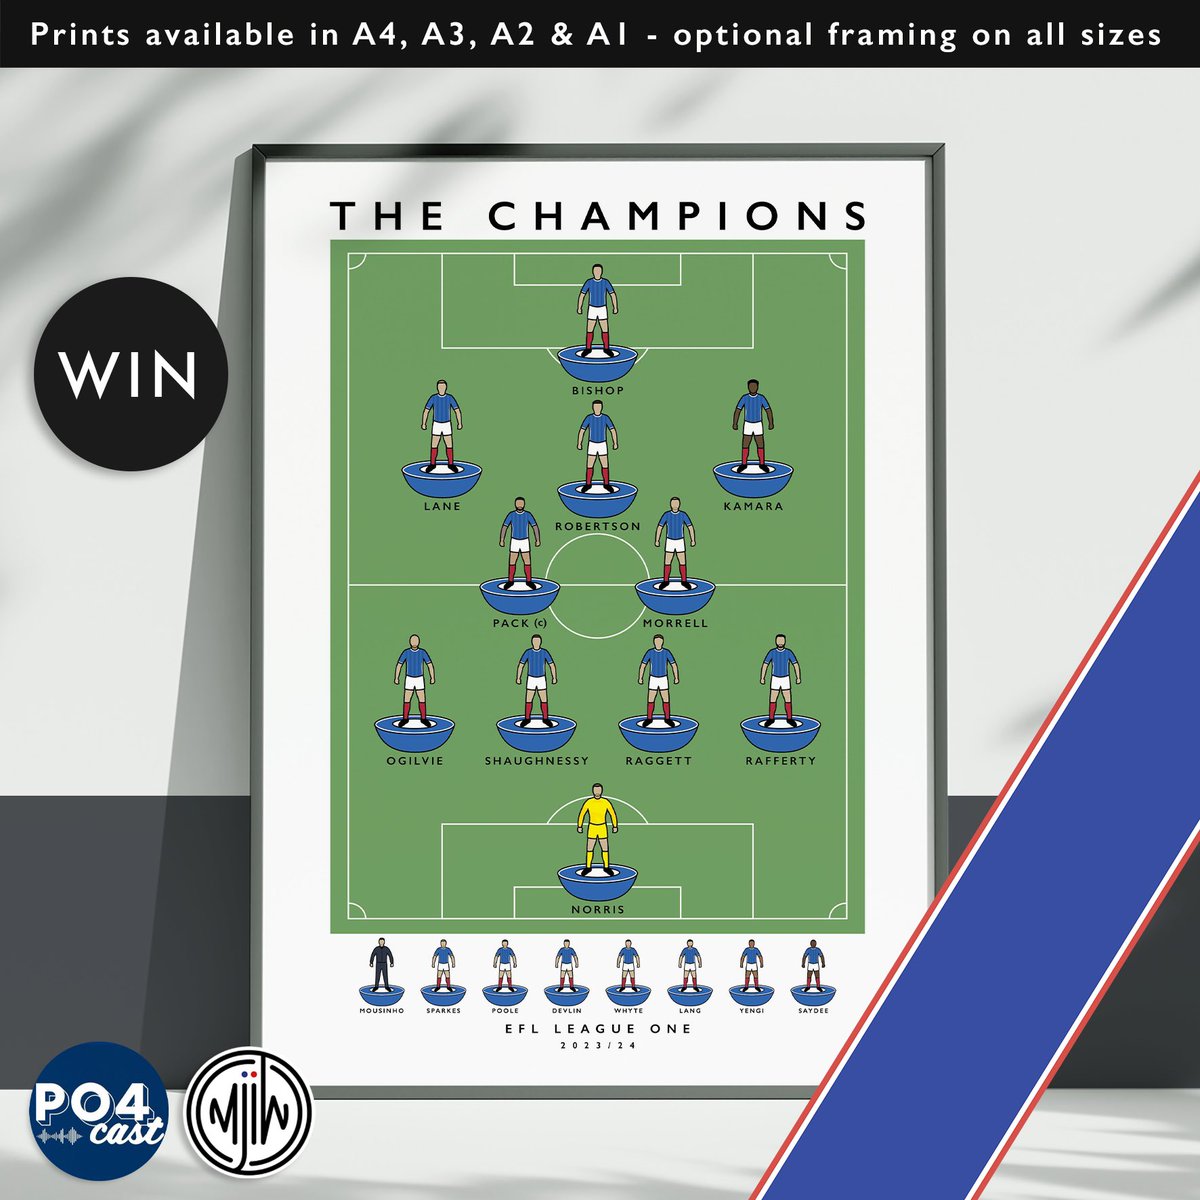 🏆 THE CHAMPIONS 🏆 😍 Chance to win this @matthewjiwood #Pompey print! 🔁 Share this post 🤝 Follow @PO4cast and @matthewjiwood 🔜 Winner announced later this week!